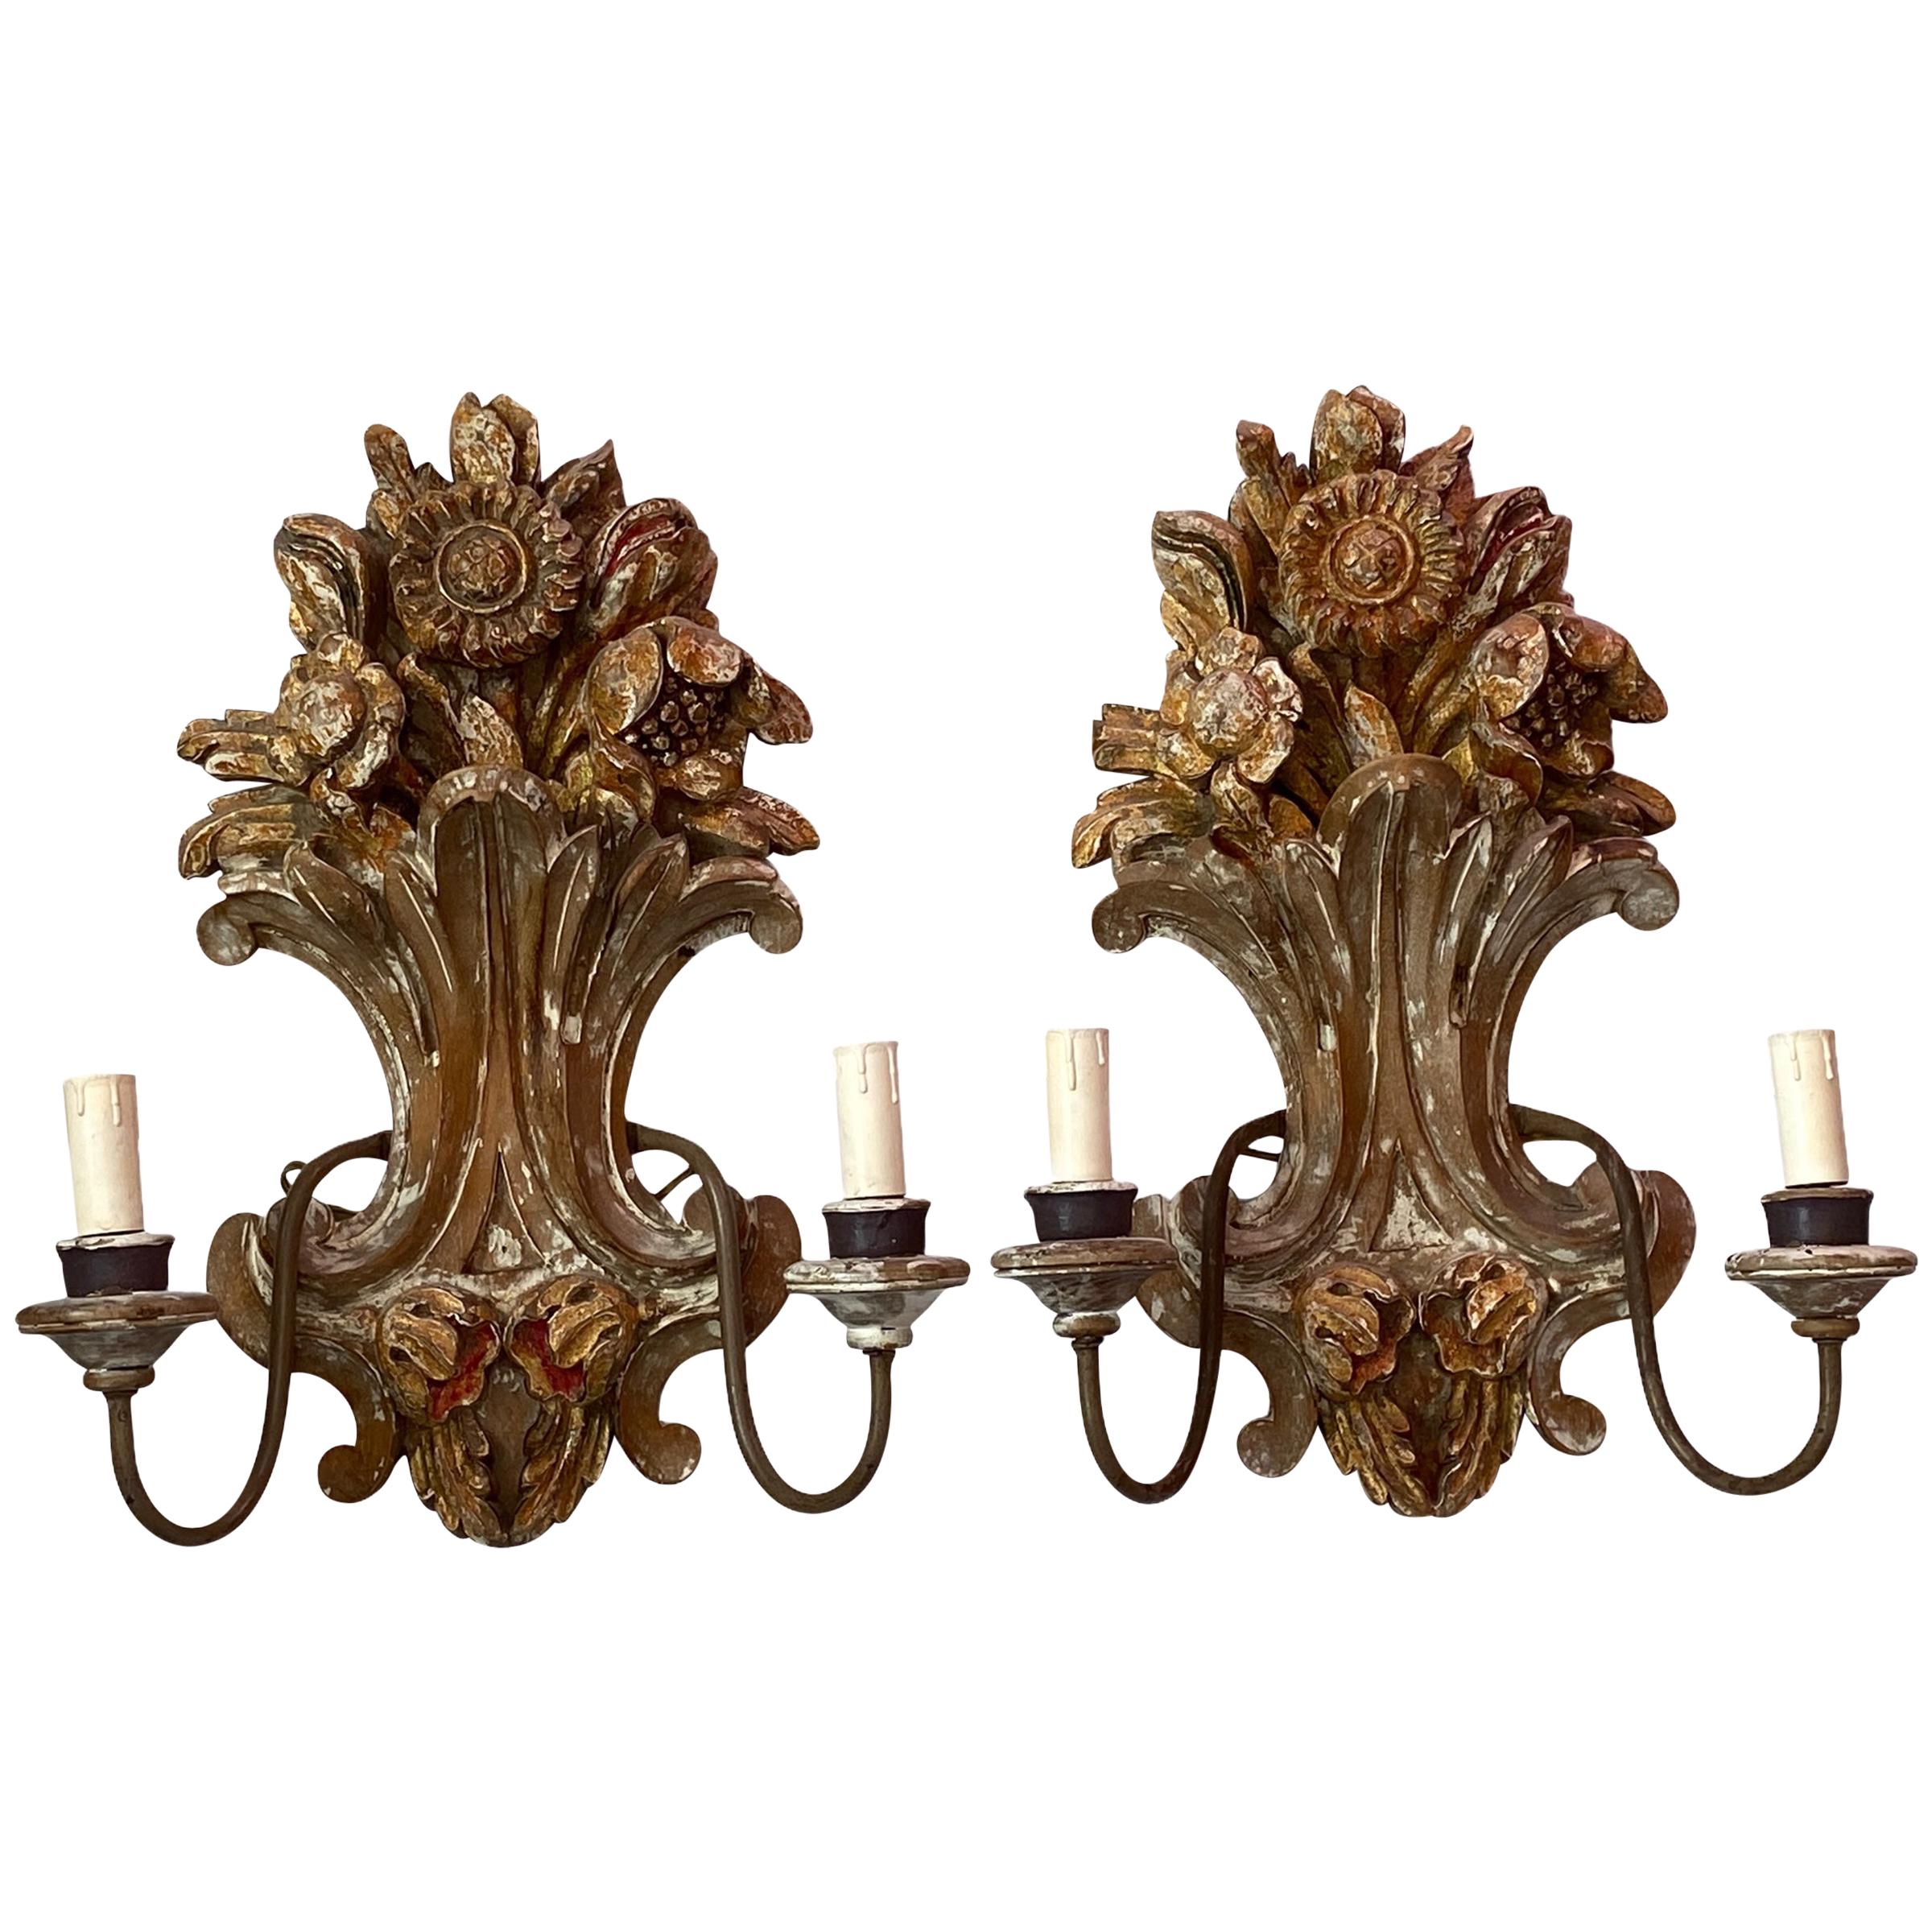 Pair of Wooden Carved Tole Toleware Sconces Chippywhite Gilt Flowers, Italy For Sale